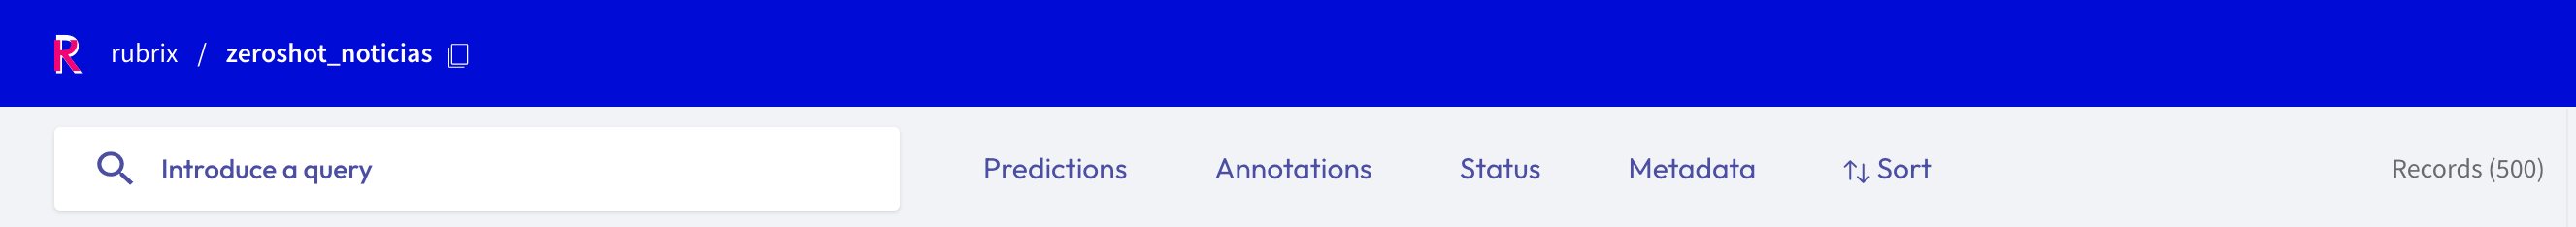 Search and filter for annotation view